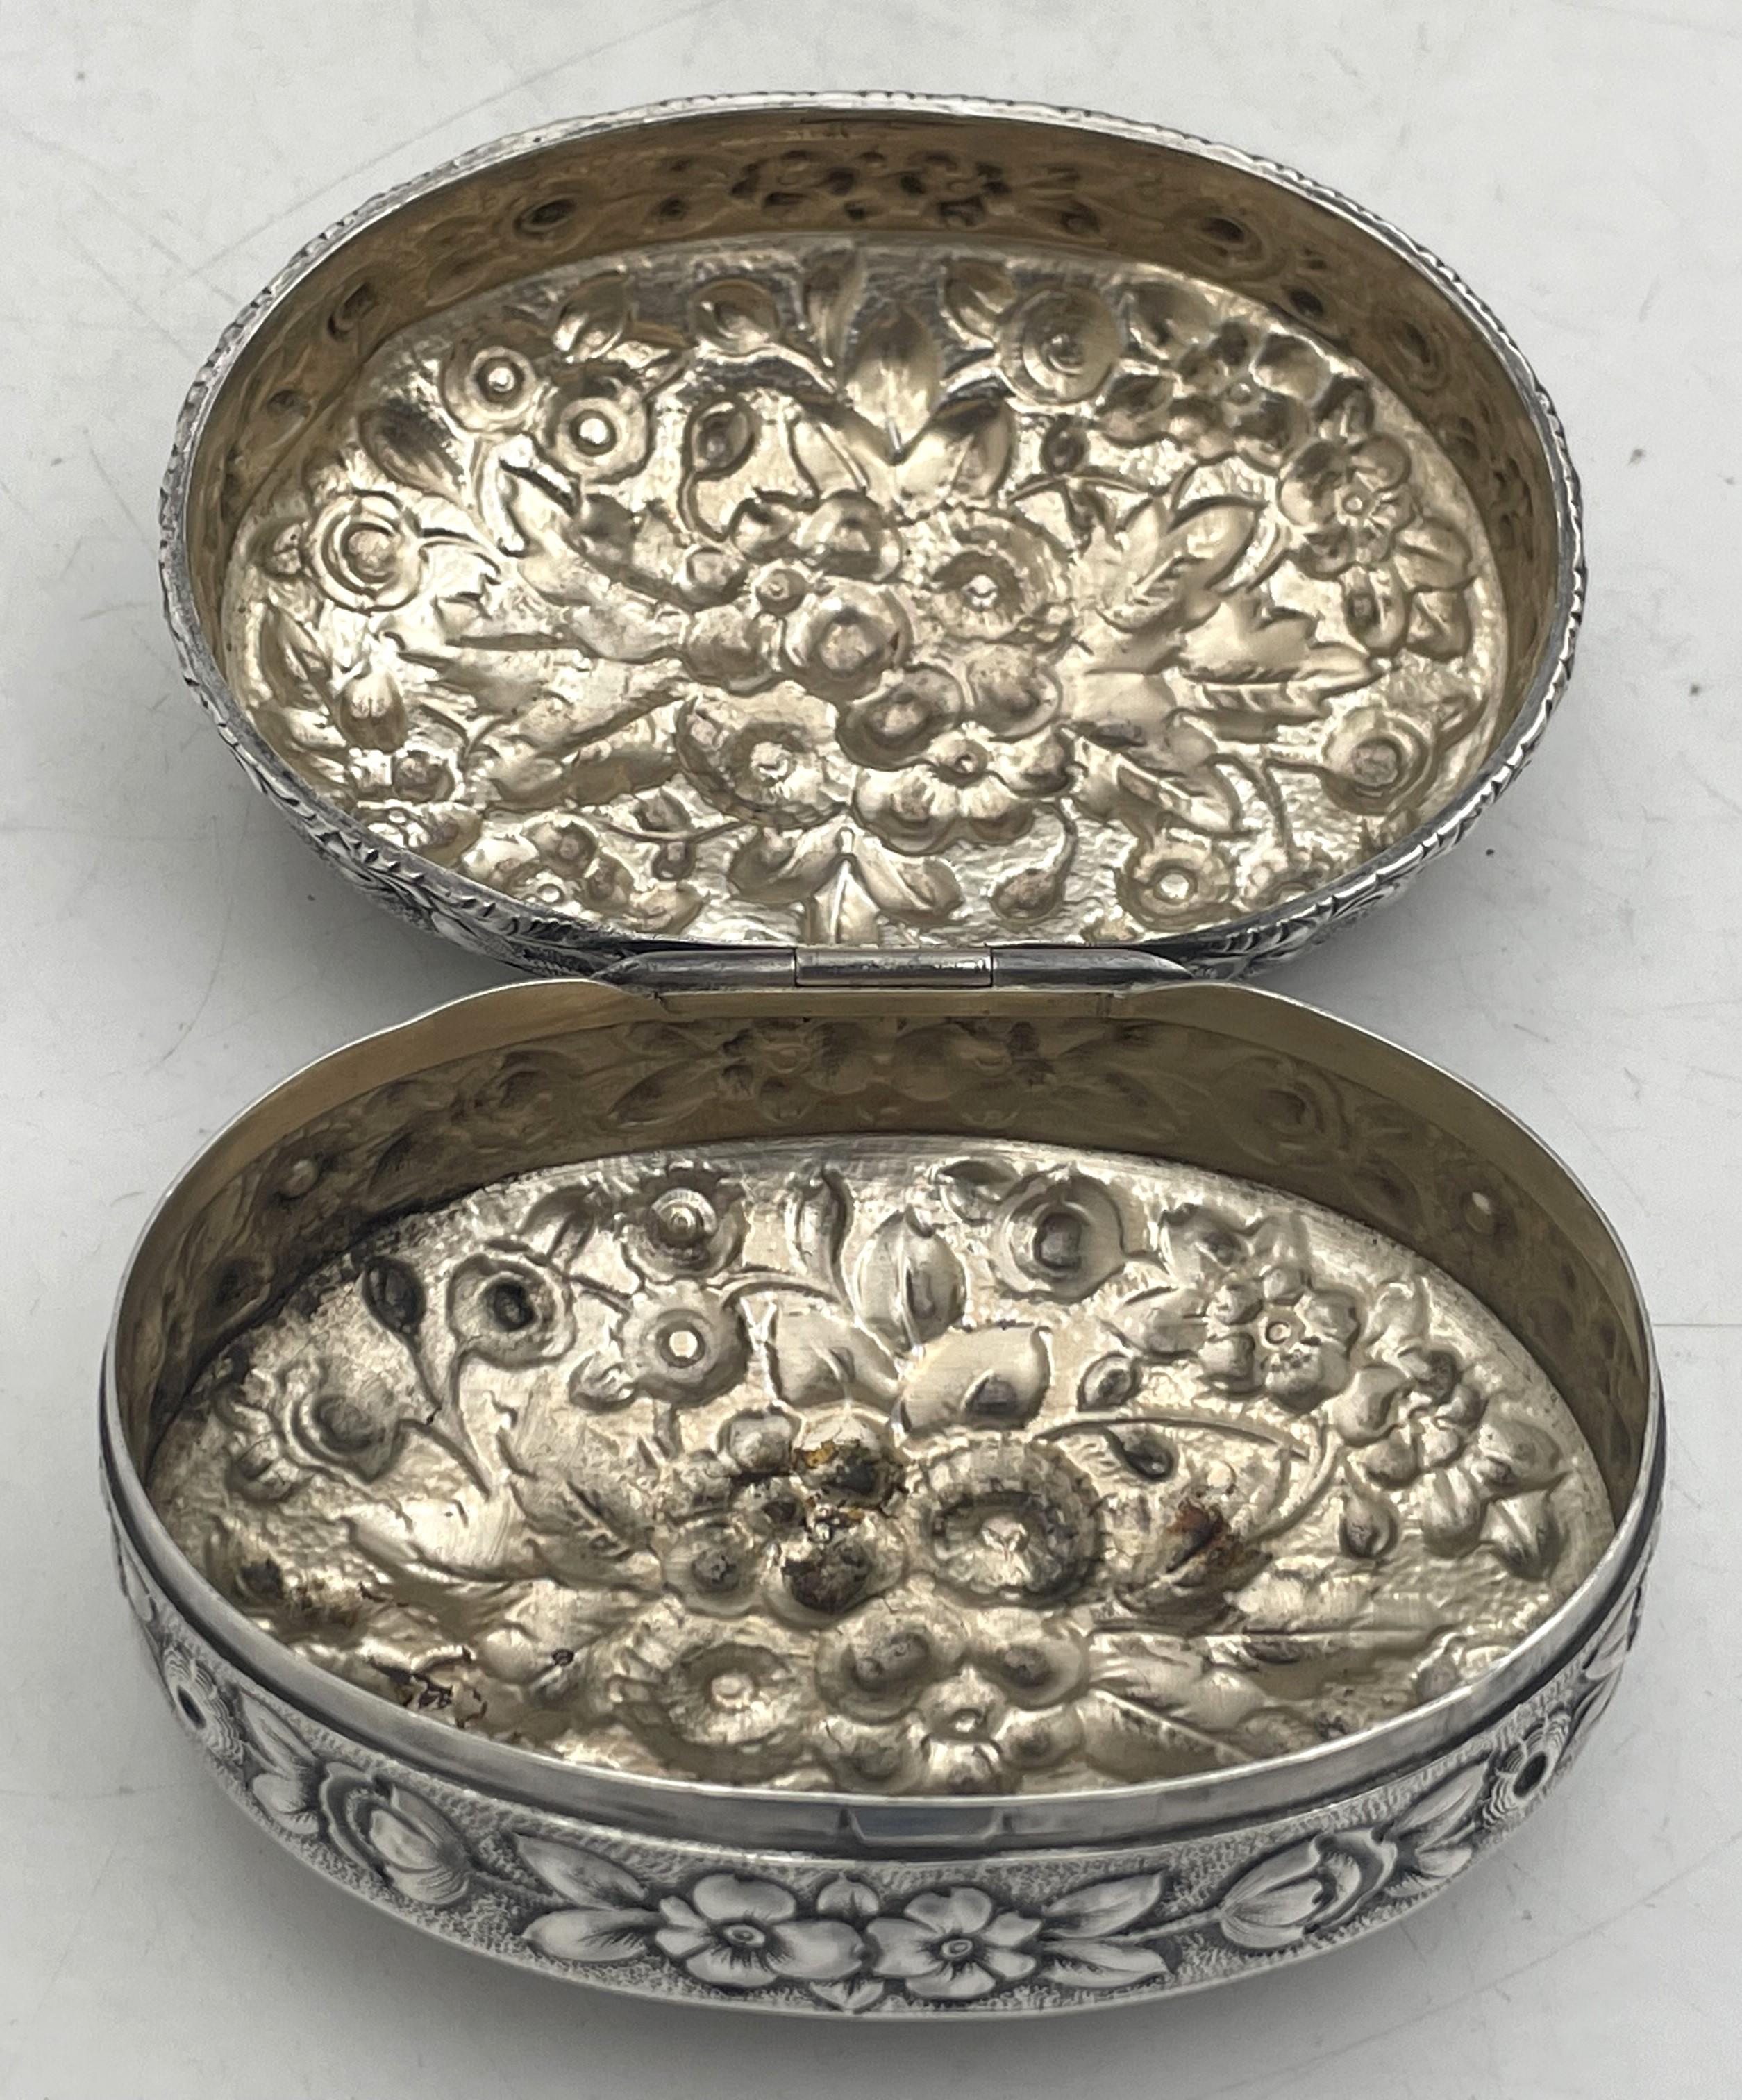 Dominick & Haff / Bailey, Banks & Biddle Oval Repousse-Schnupftabakdose aus Sterlingsilber im Zustand „Gut“ im Angebot in New York, NY